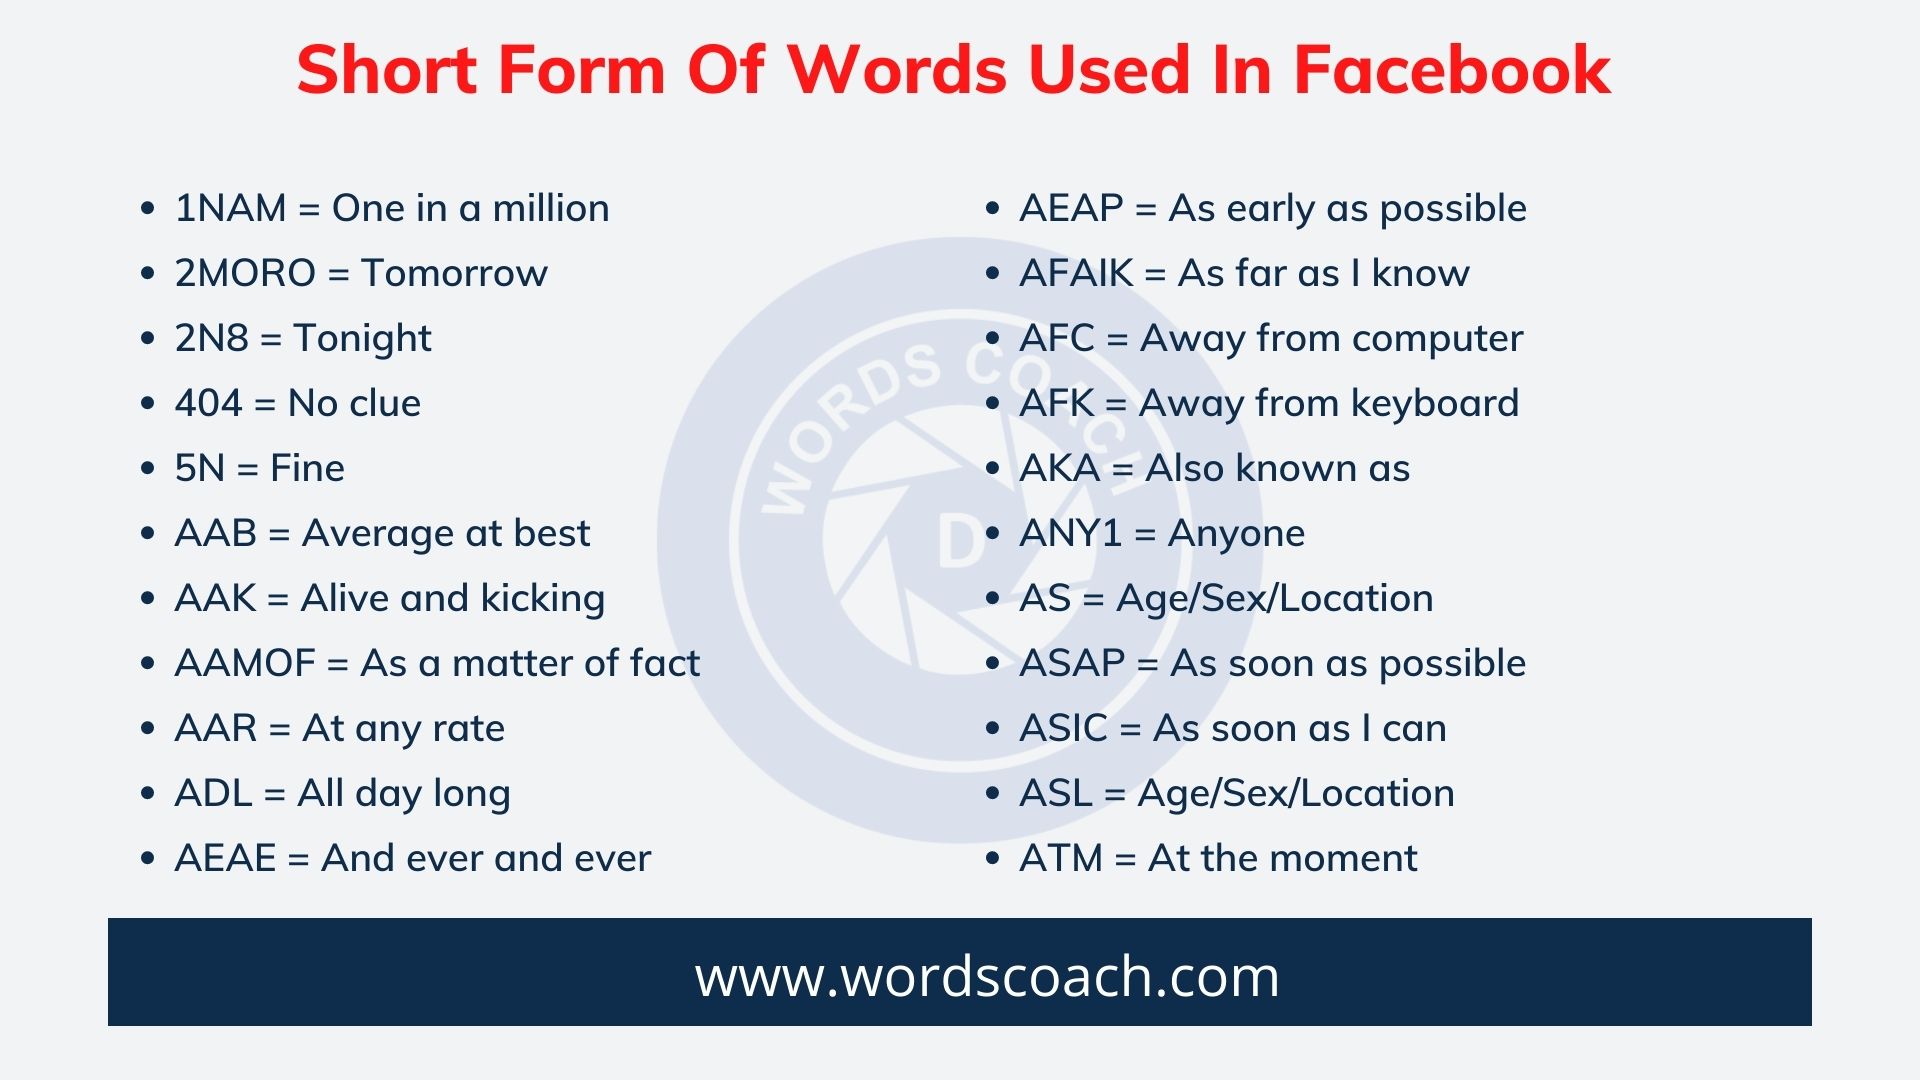 Short Form Of Words Used In Facebook